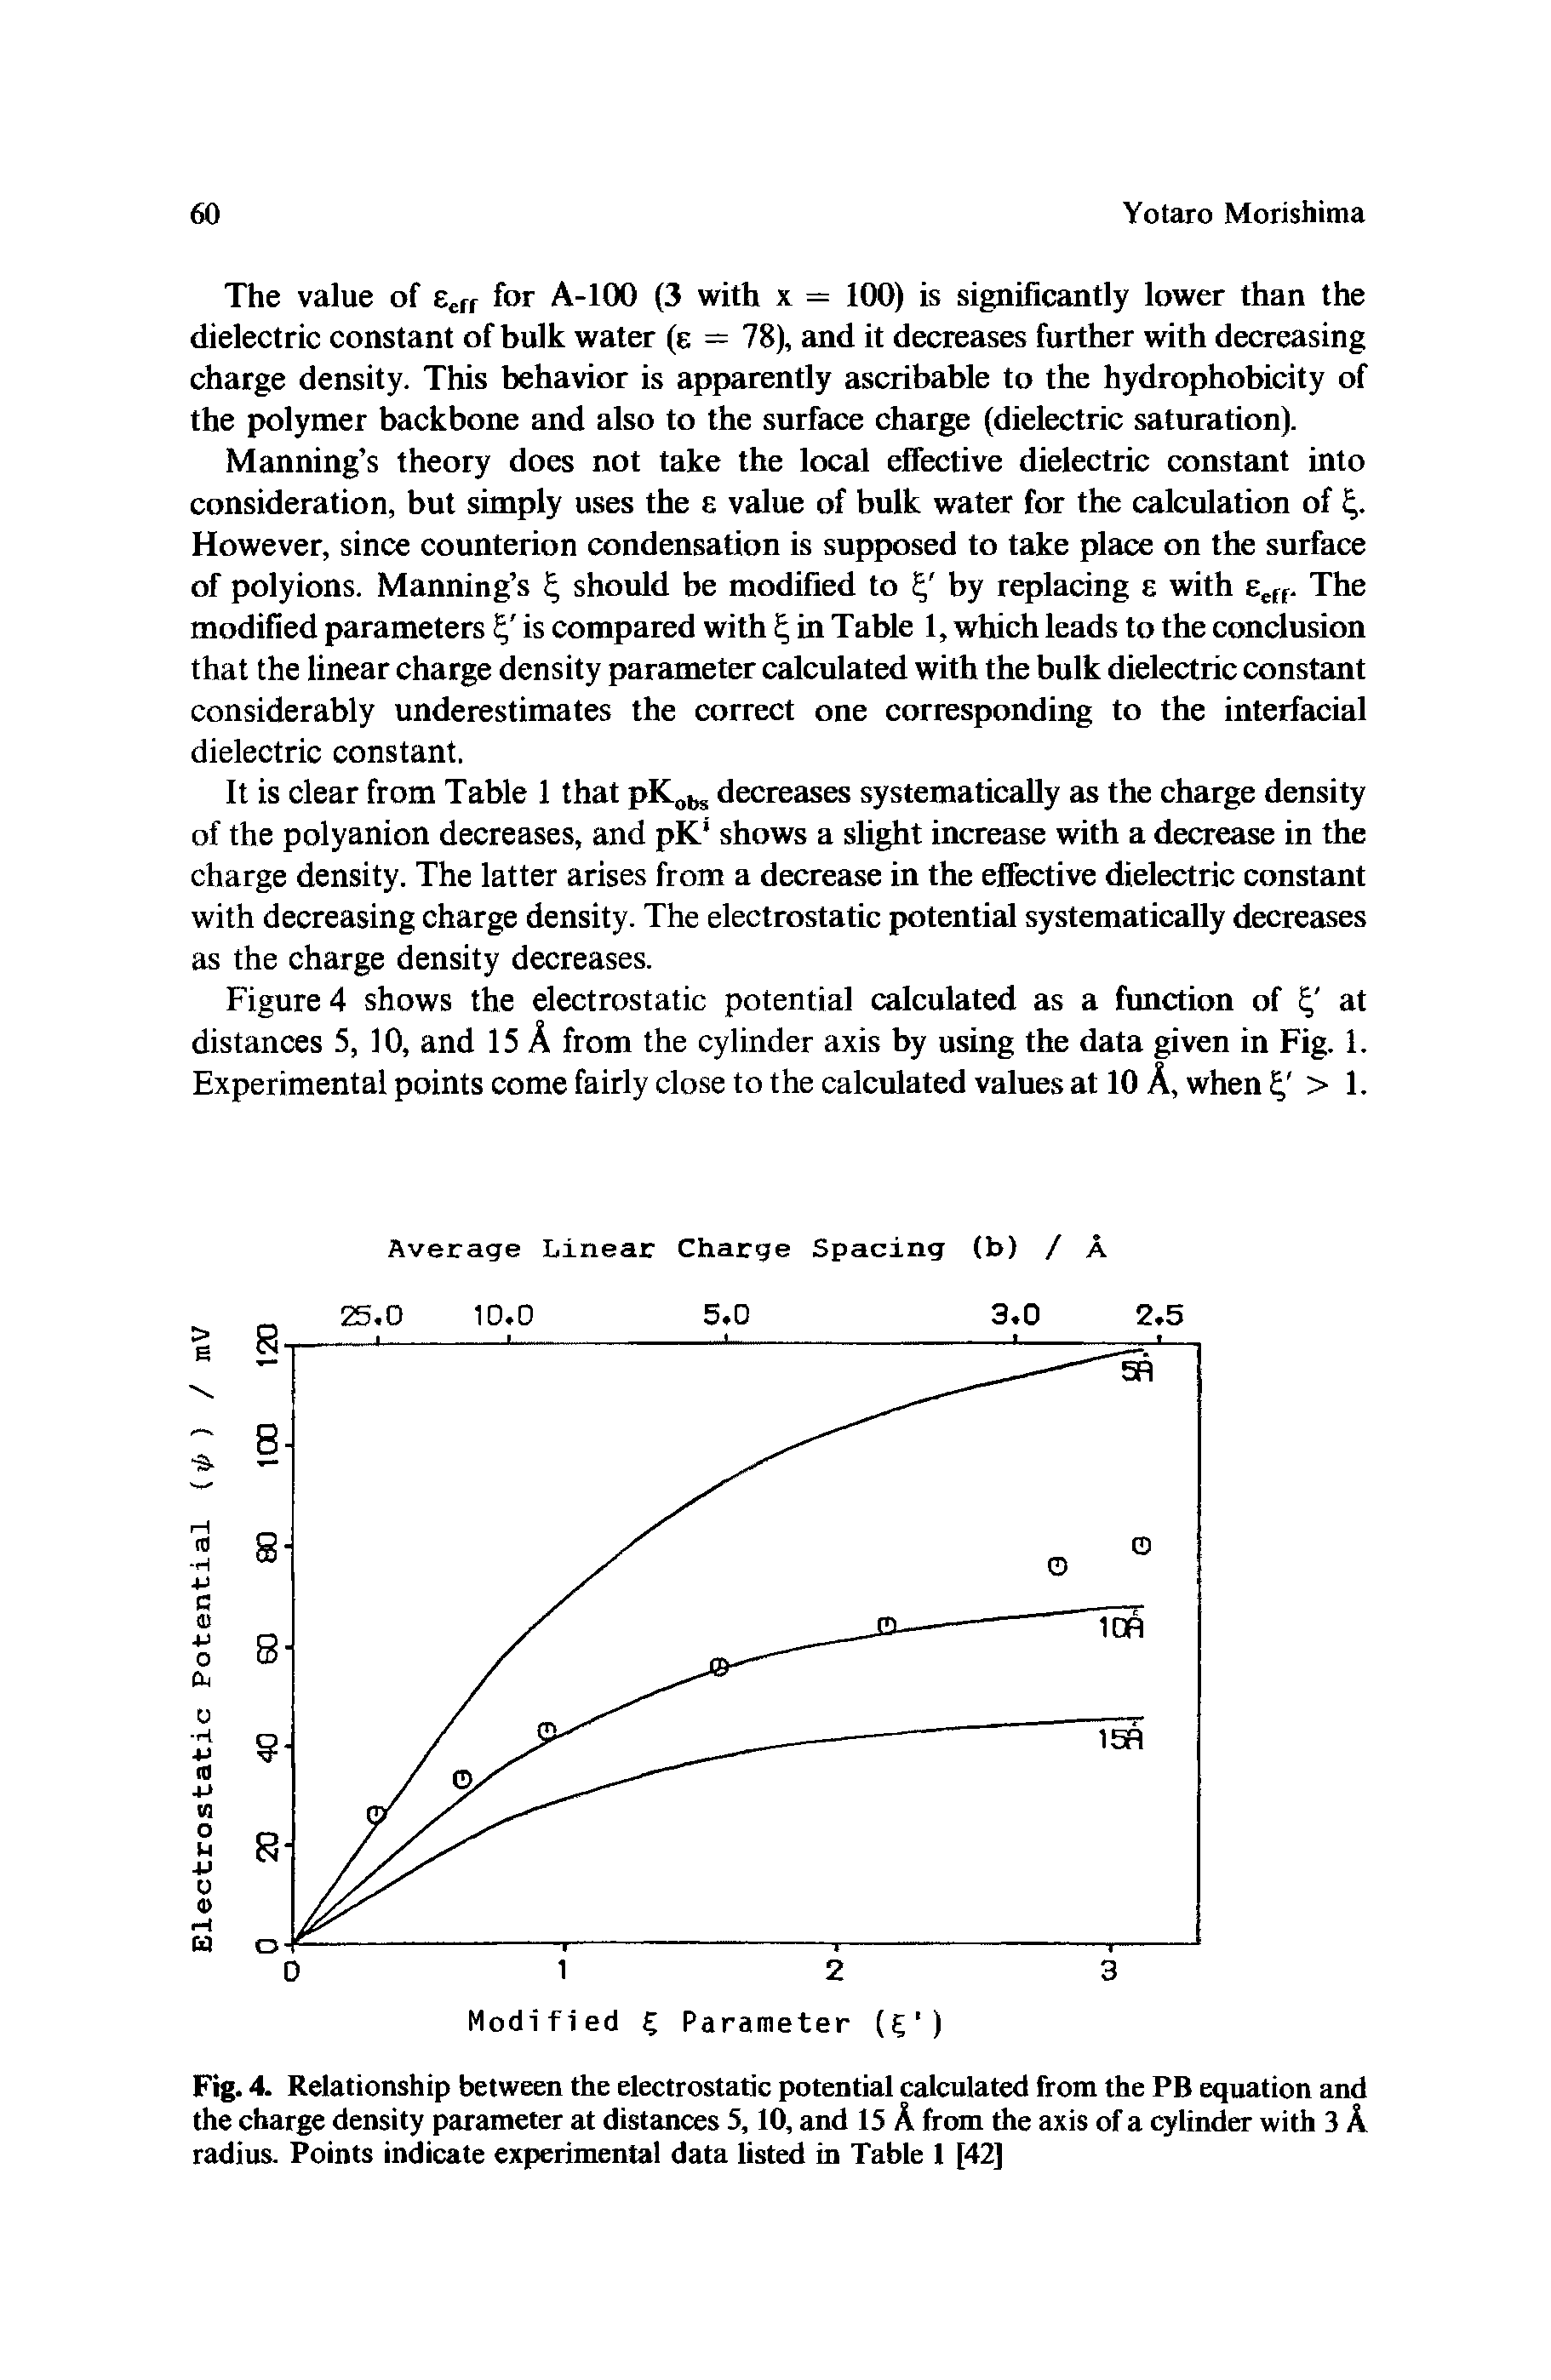 Fig. 4. Relationship between the electrostatic potential calculated from the PB equation and the charge density parameter at distances 5,10, and 15 A from the axis of a cylinder with 3 A radius. Points indicate experimental data listed in Table 1 [42]...